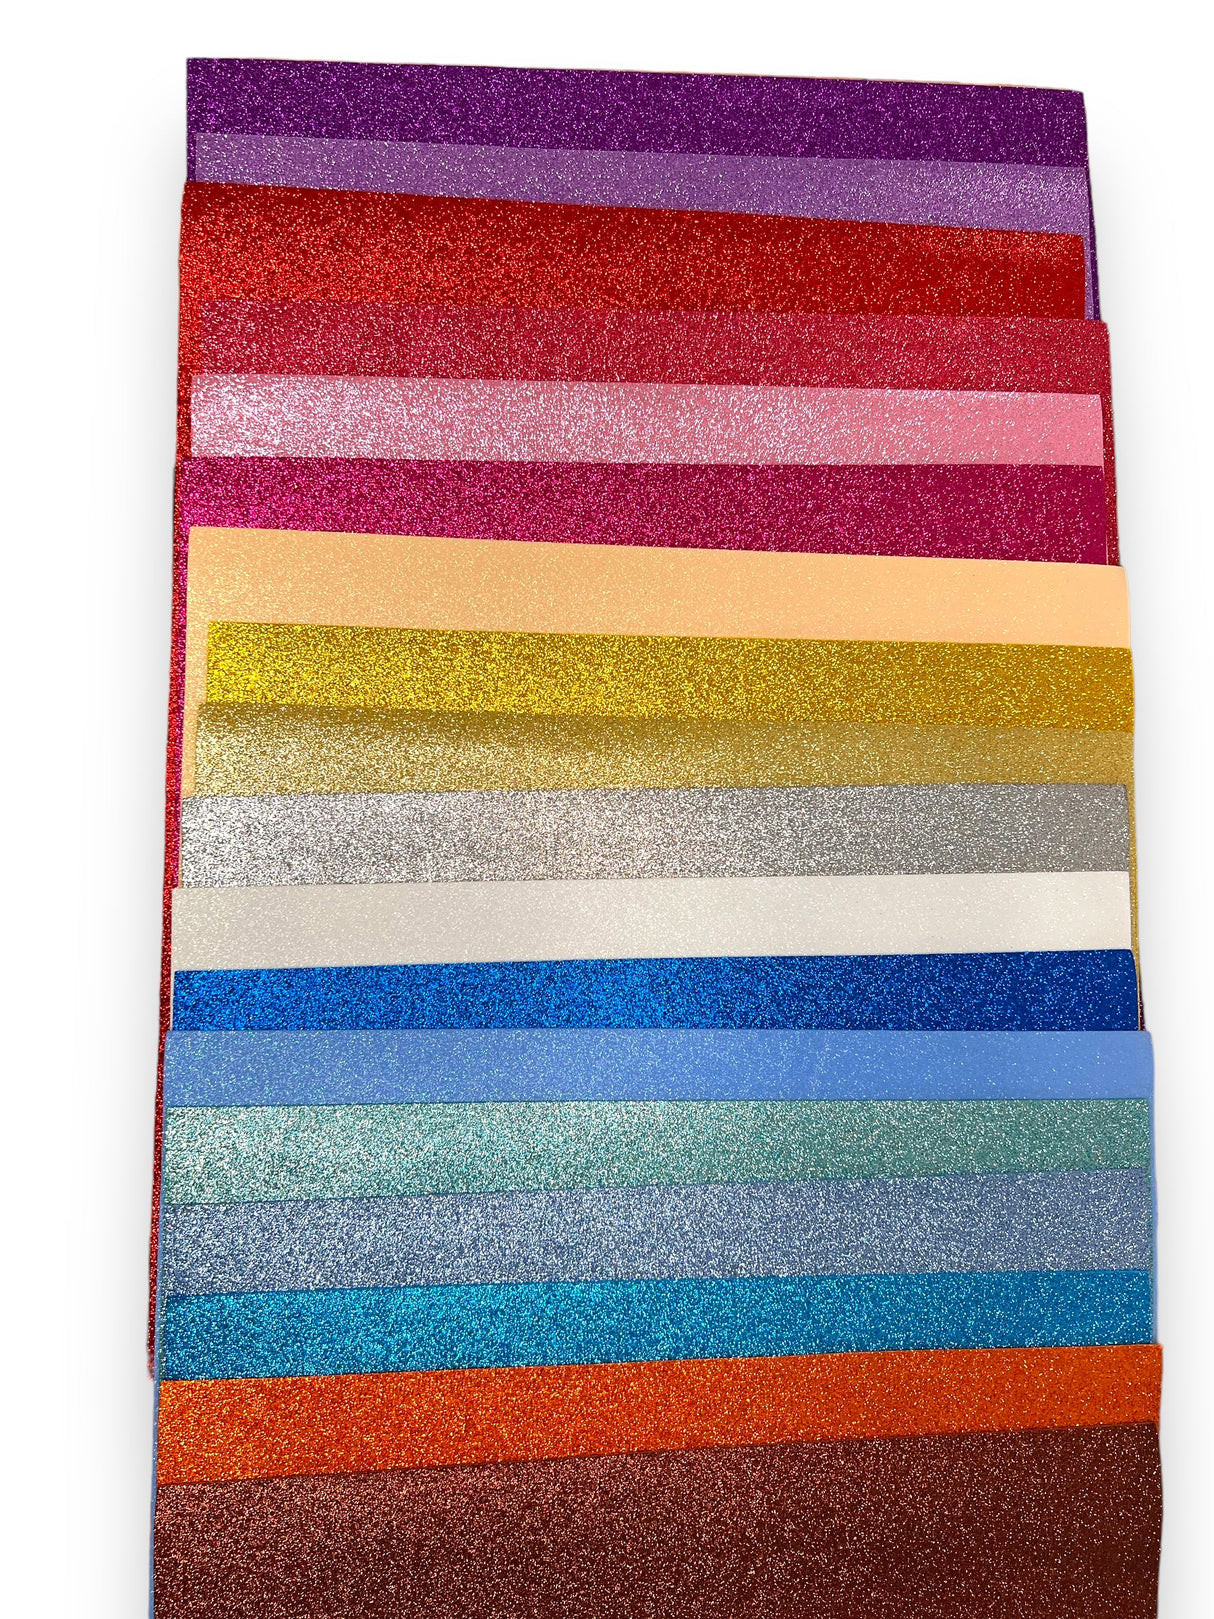 "Dazzling Displays: Explore 22 Colors in our High-Performance Glitter Foam Sheets"